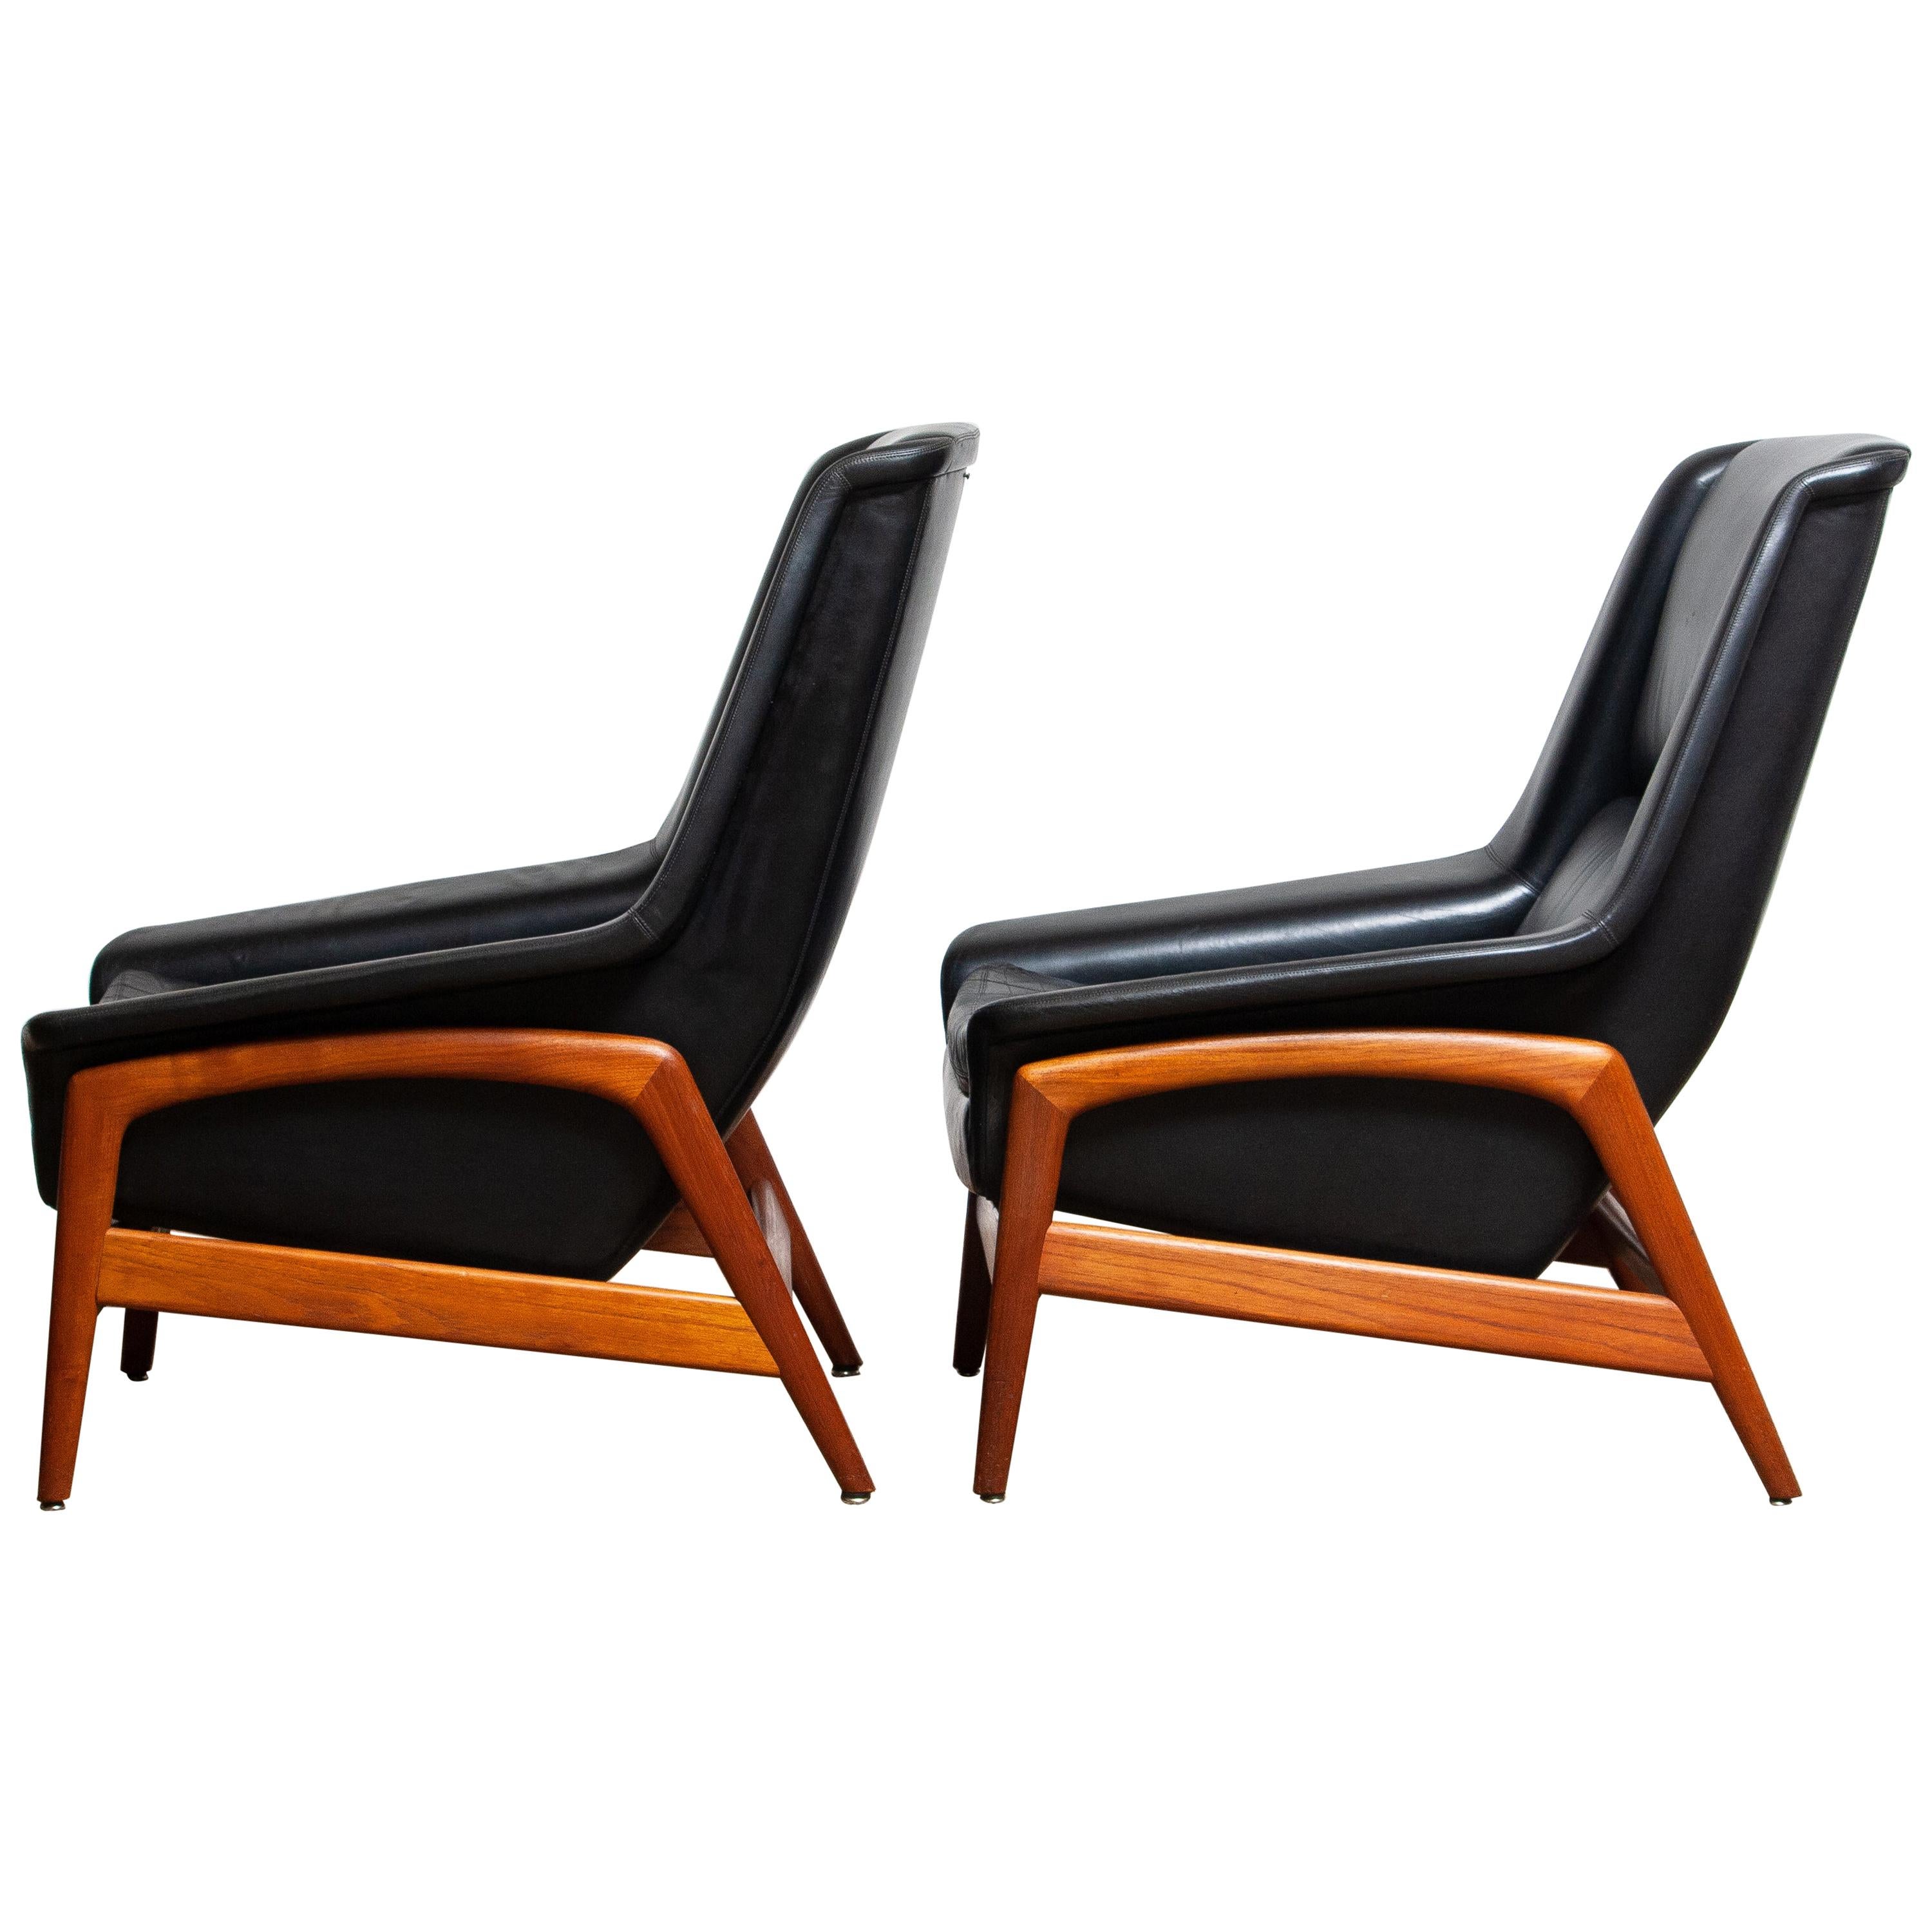 1960s, Pair of Lounge Chairs 'Profil', Folke Ohlsson for DUX in Leather and Teak